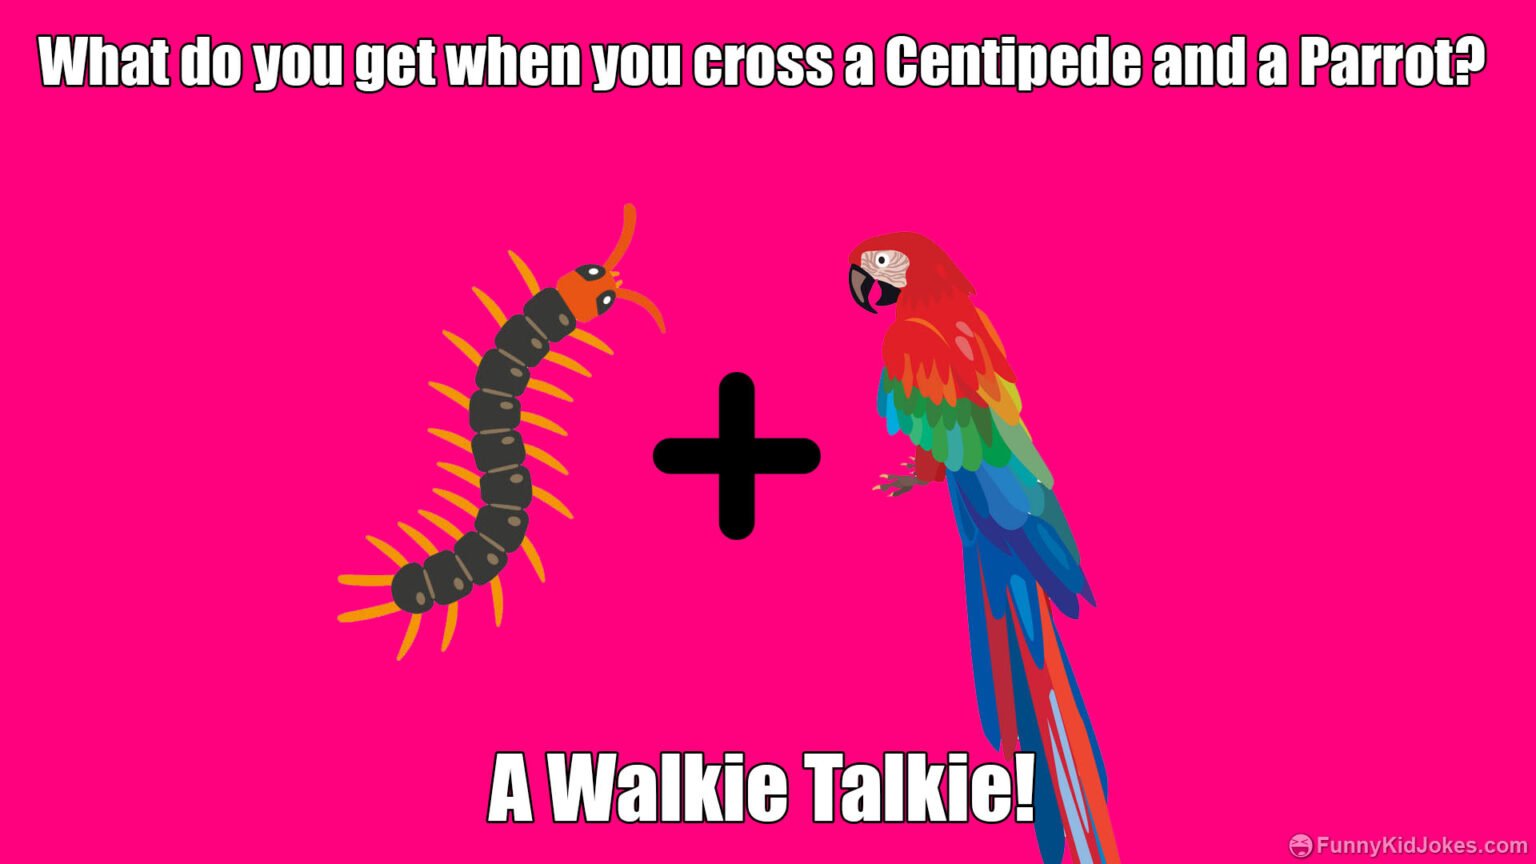 what-do-you-get-when-you-cross-a-centipede-and-a-parrot-funny-kid-jokes